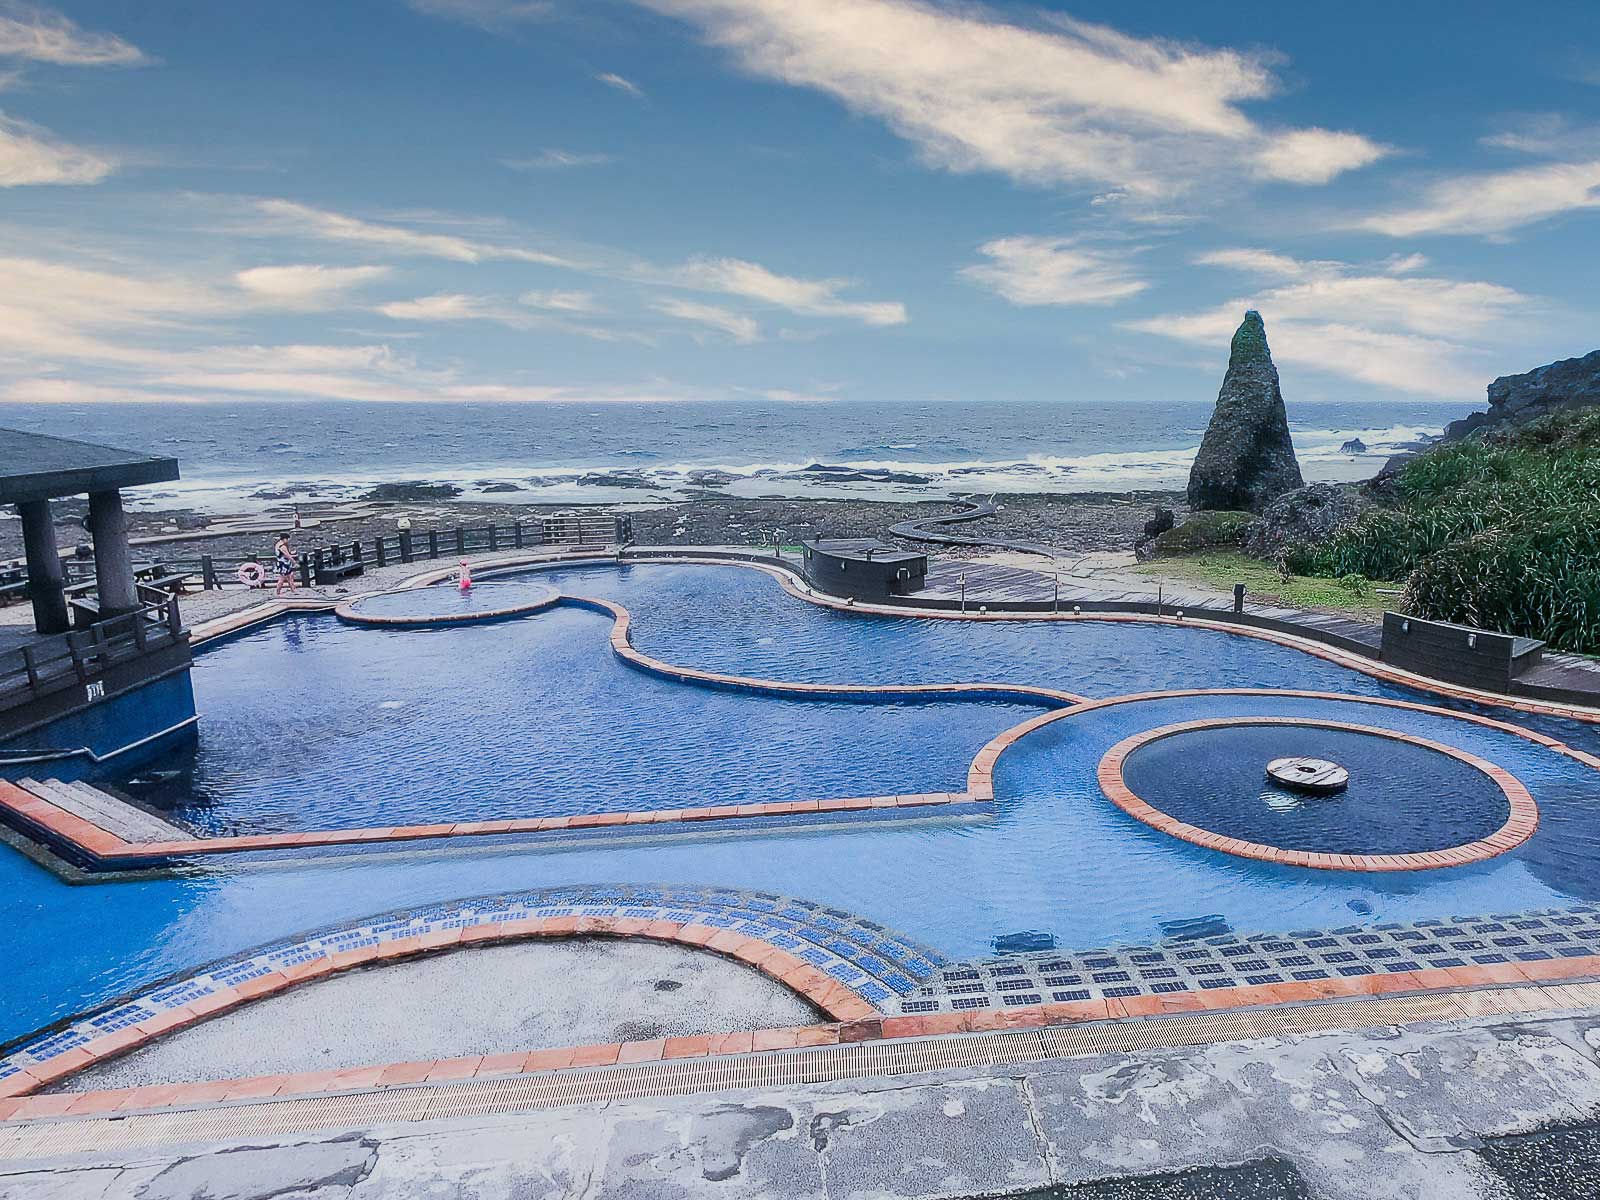 Multiple tiers of hot spring pools lead down to the volcanic coast at Green Island's Zhaori Hot Spring.